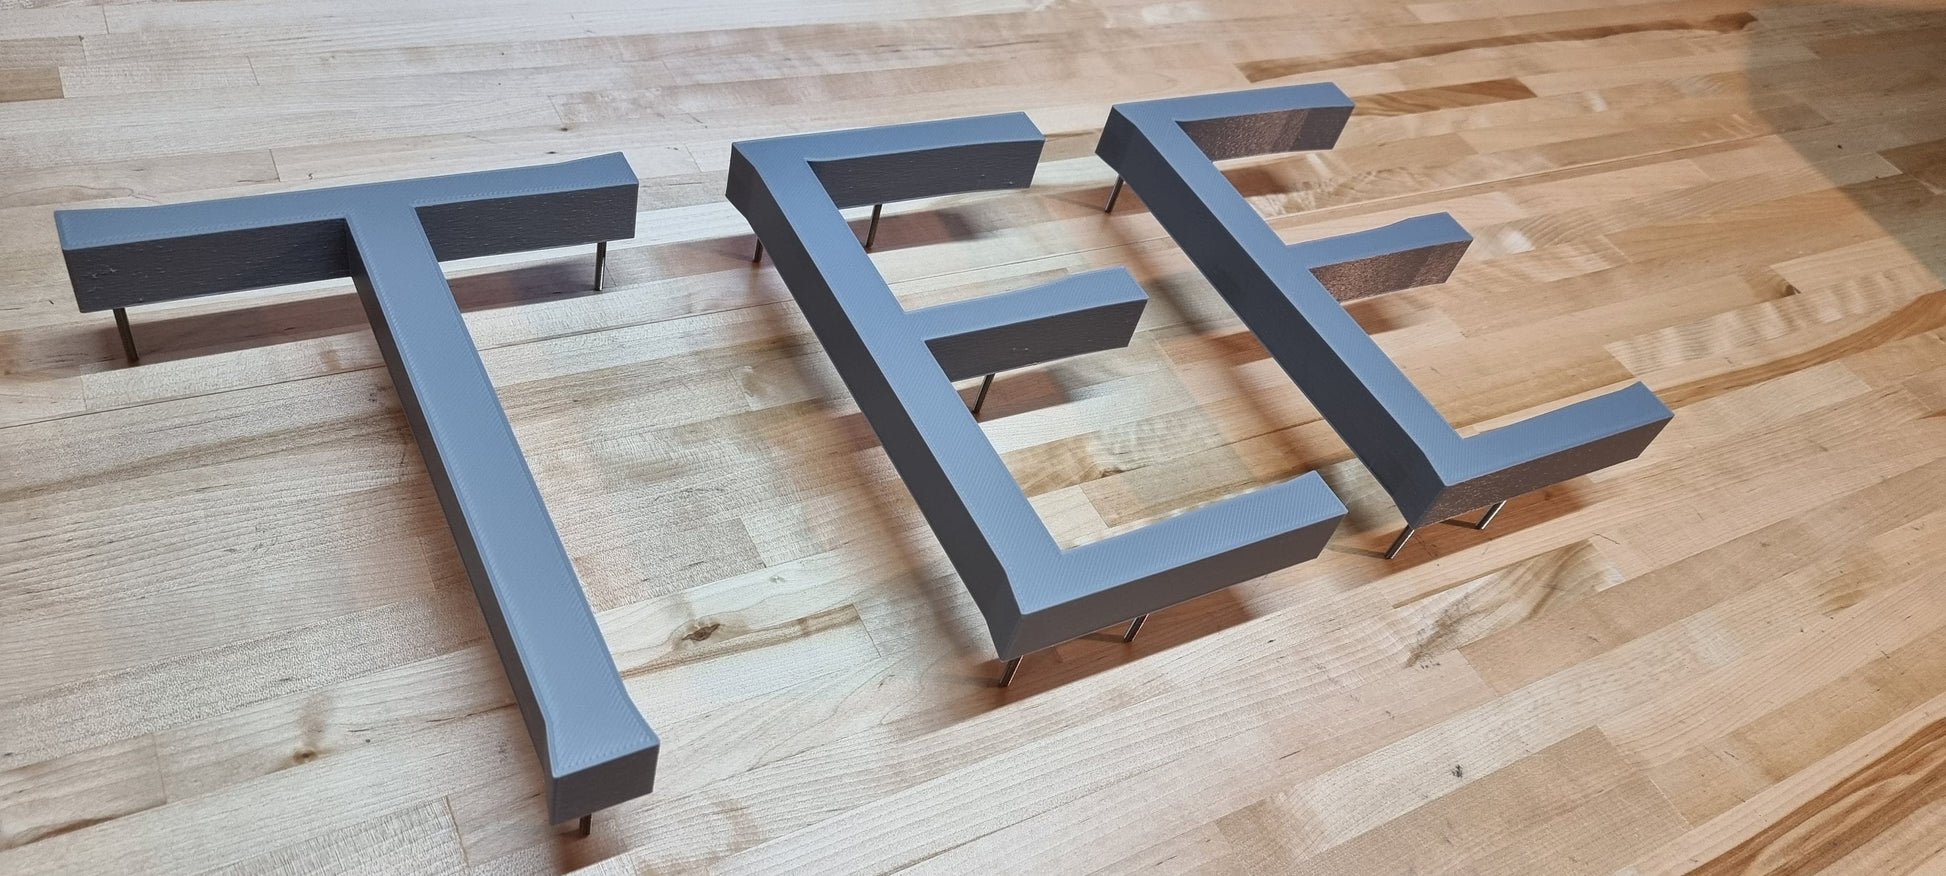 Totally Custom 3D Indoor Sign Letters (Stud Mount). 1 Inch Thick, Any Font, Size or Color! Our 3D Stud Mount Sign Letters Make An Impact